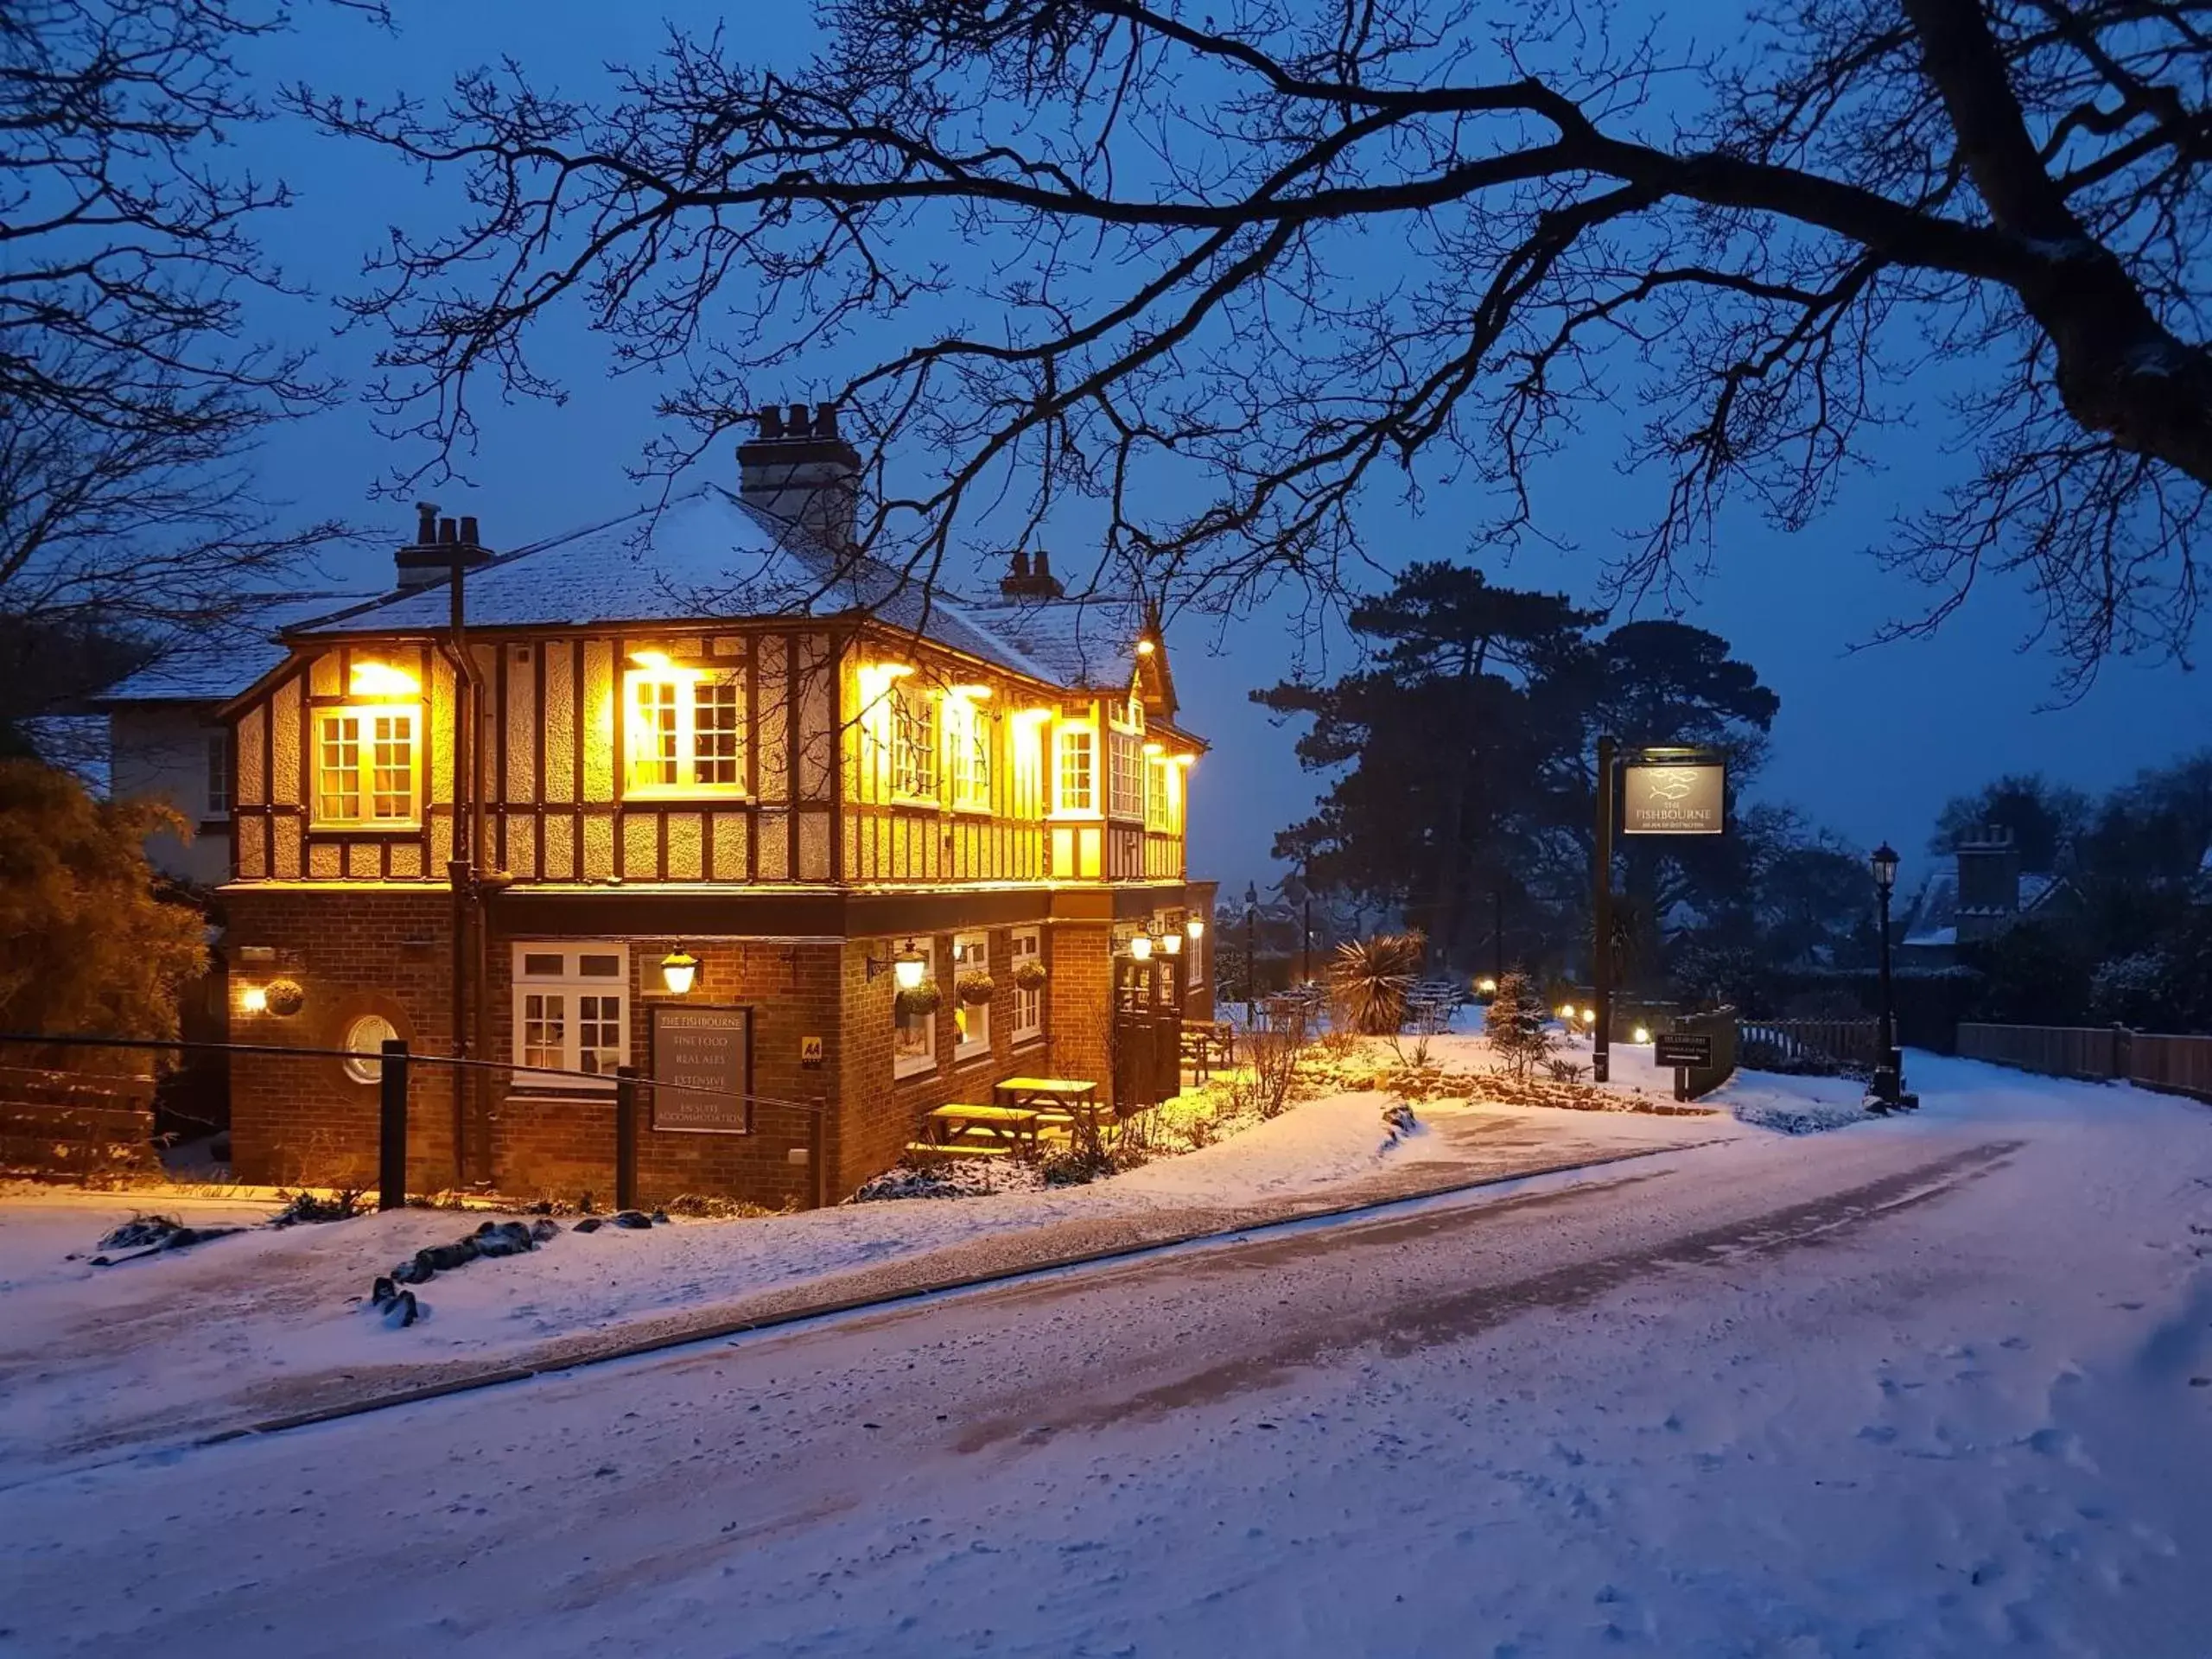 Property building, Winter in The Fishbourne